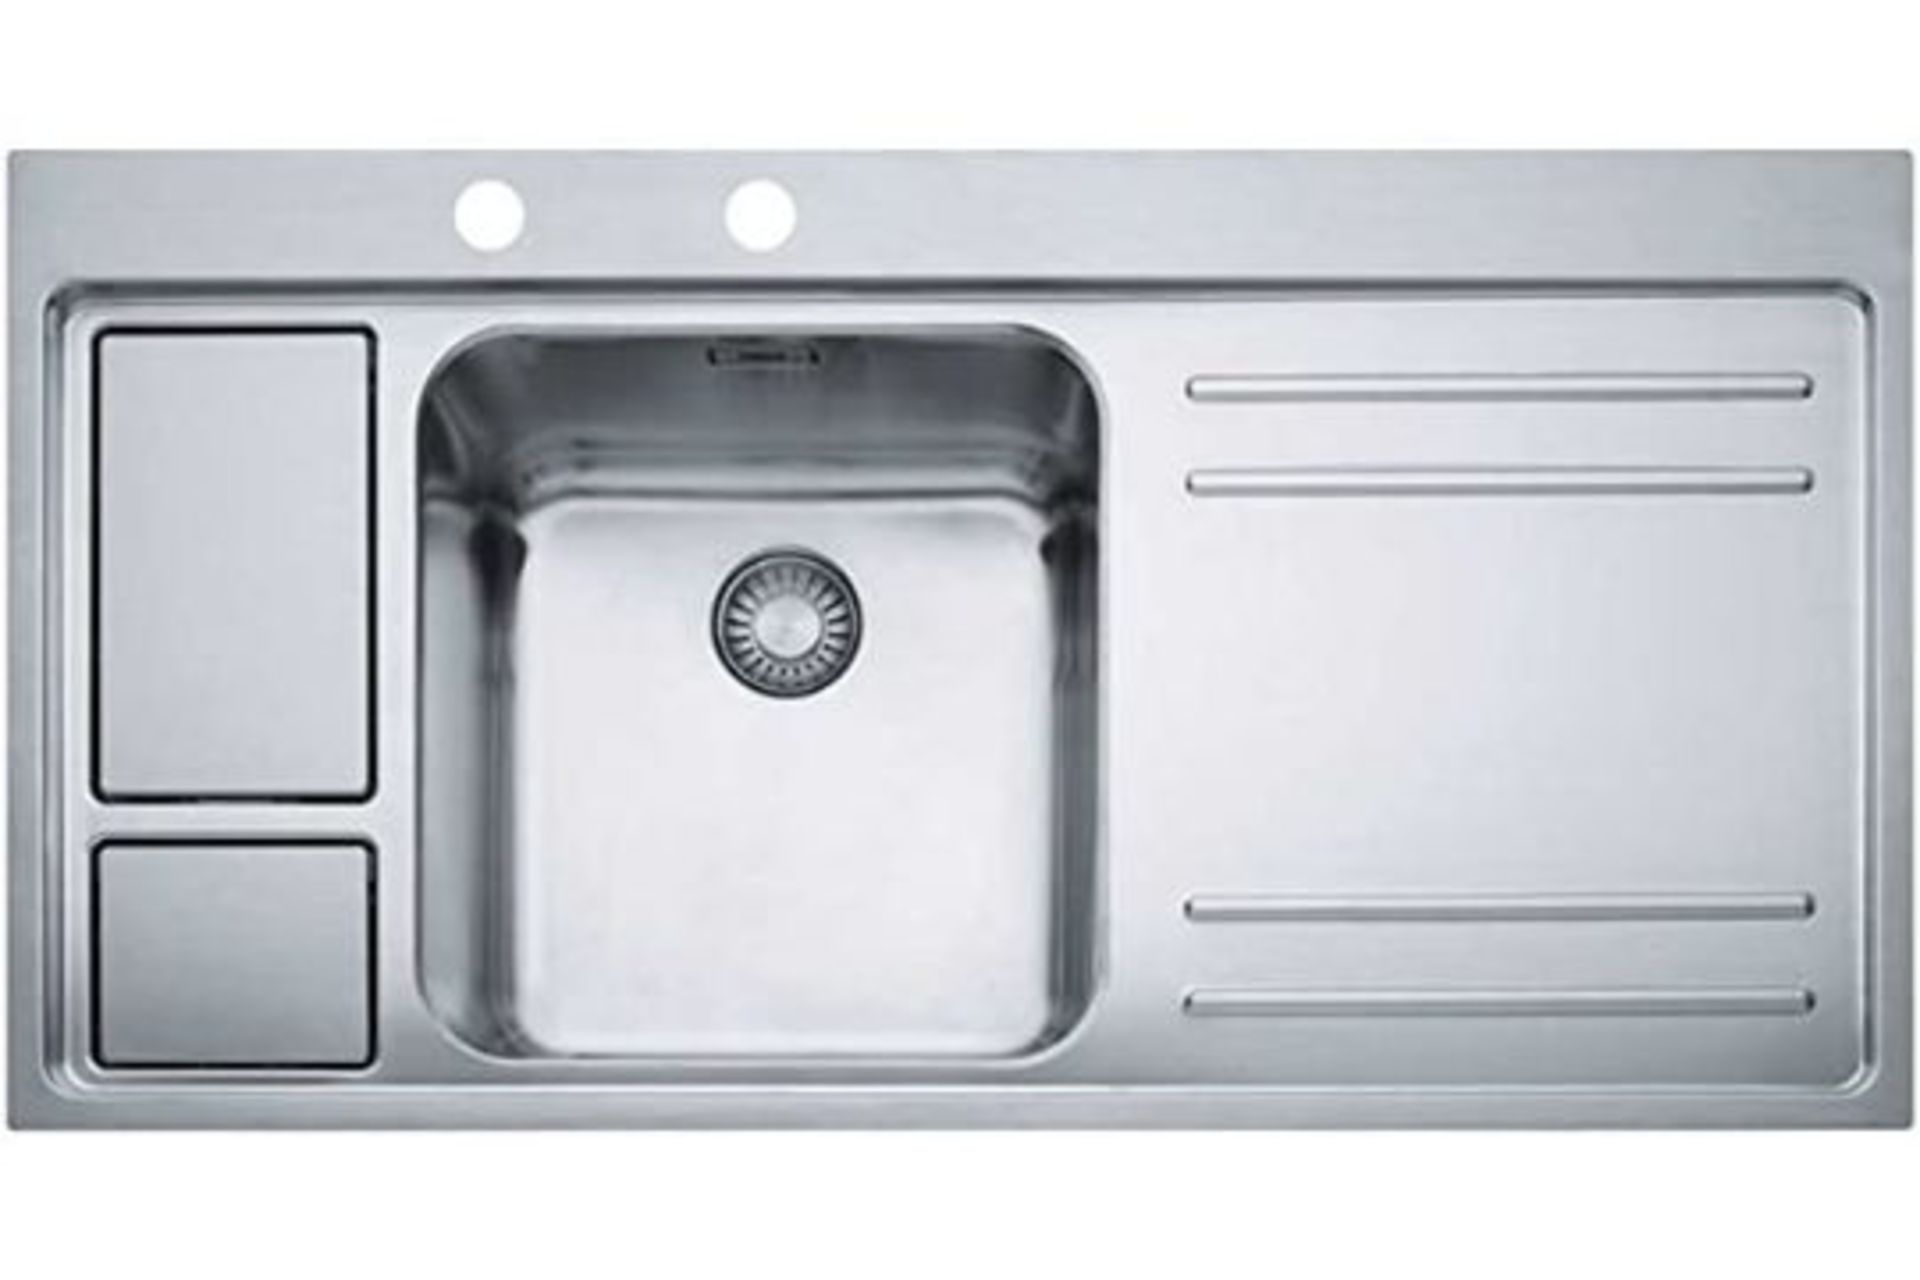 Boxed Brand New Factory Sealed Franke Sink- Model- LAX 211-W-36 1000x520mm, RRP-£800.00